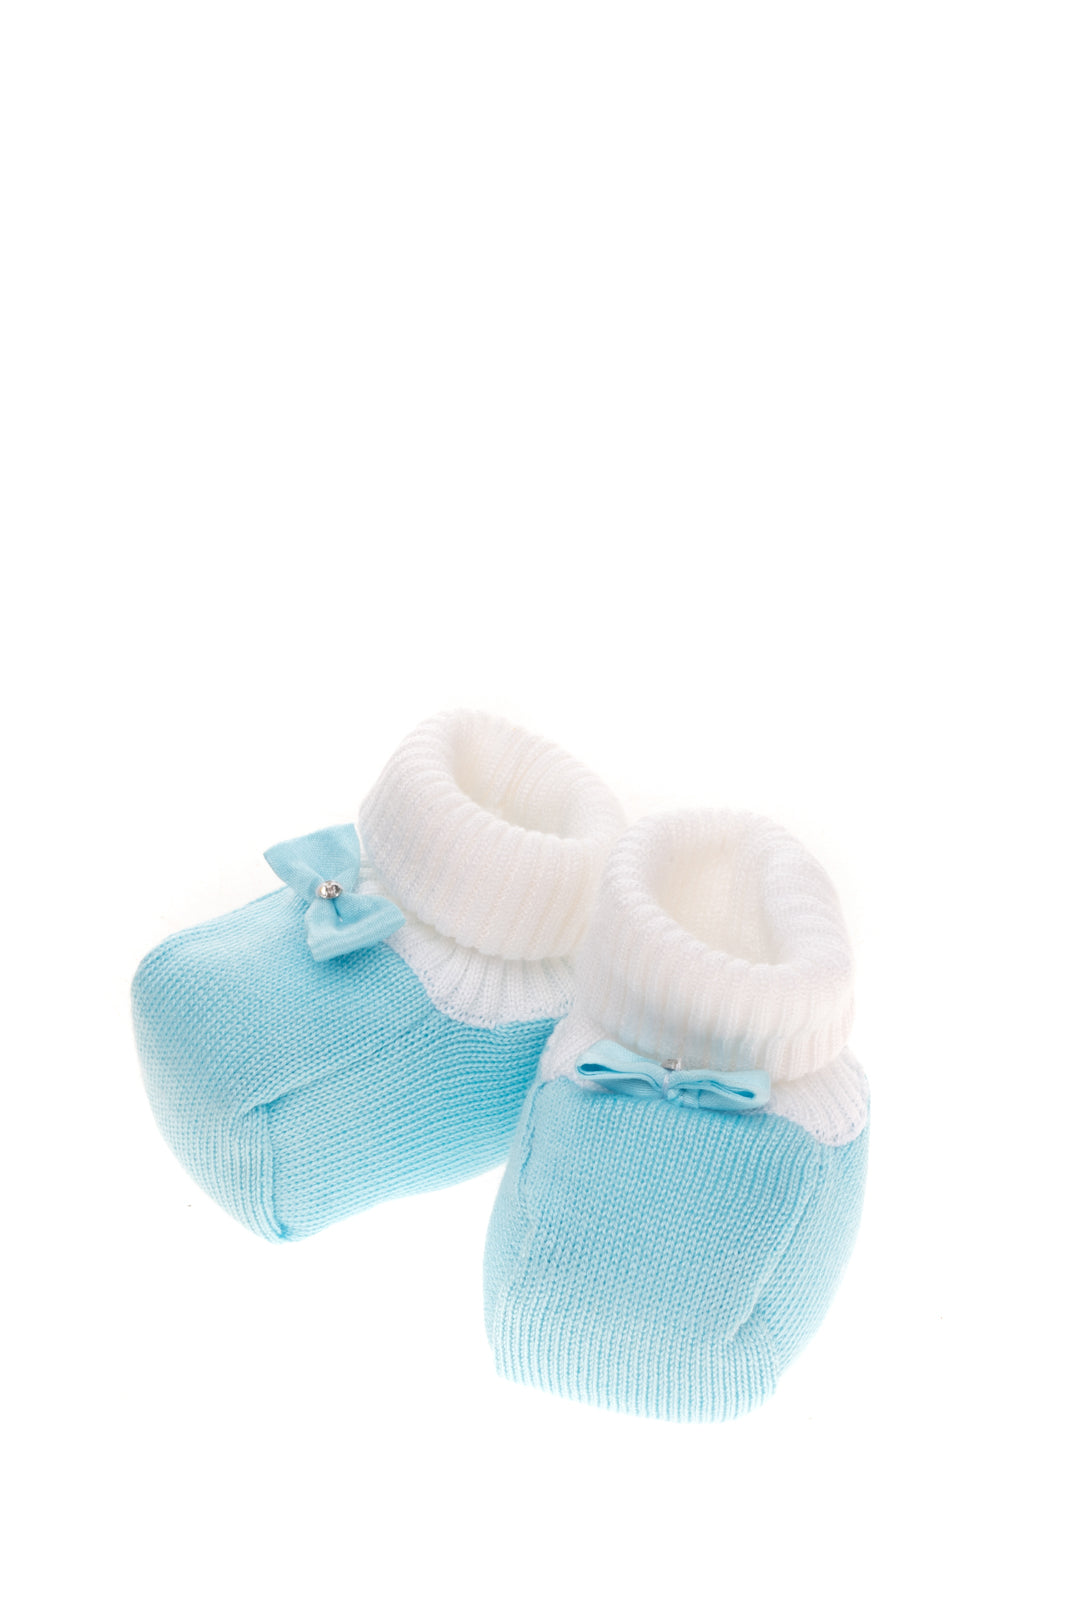 COLORICHIARI Baby Sock Shoes Size 15 UK 0 US 0 Two Tone Bow Pull On gallery main photo